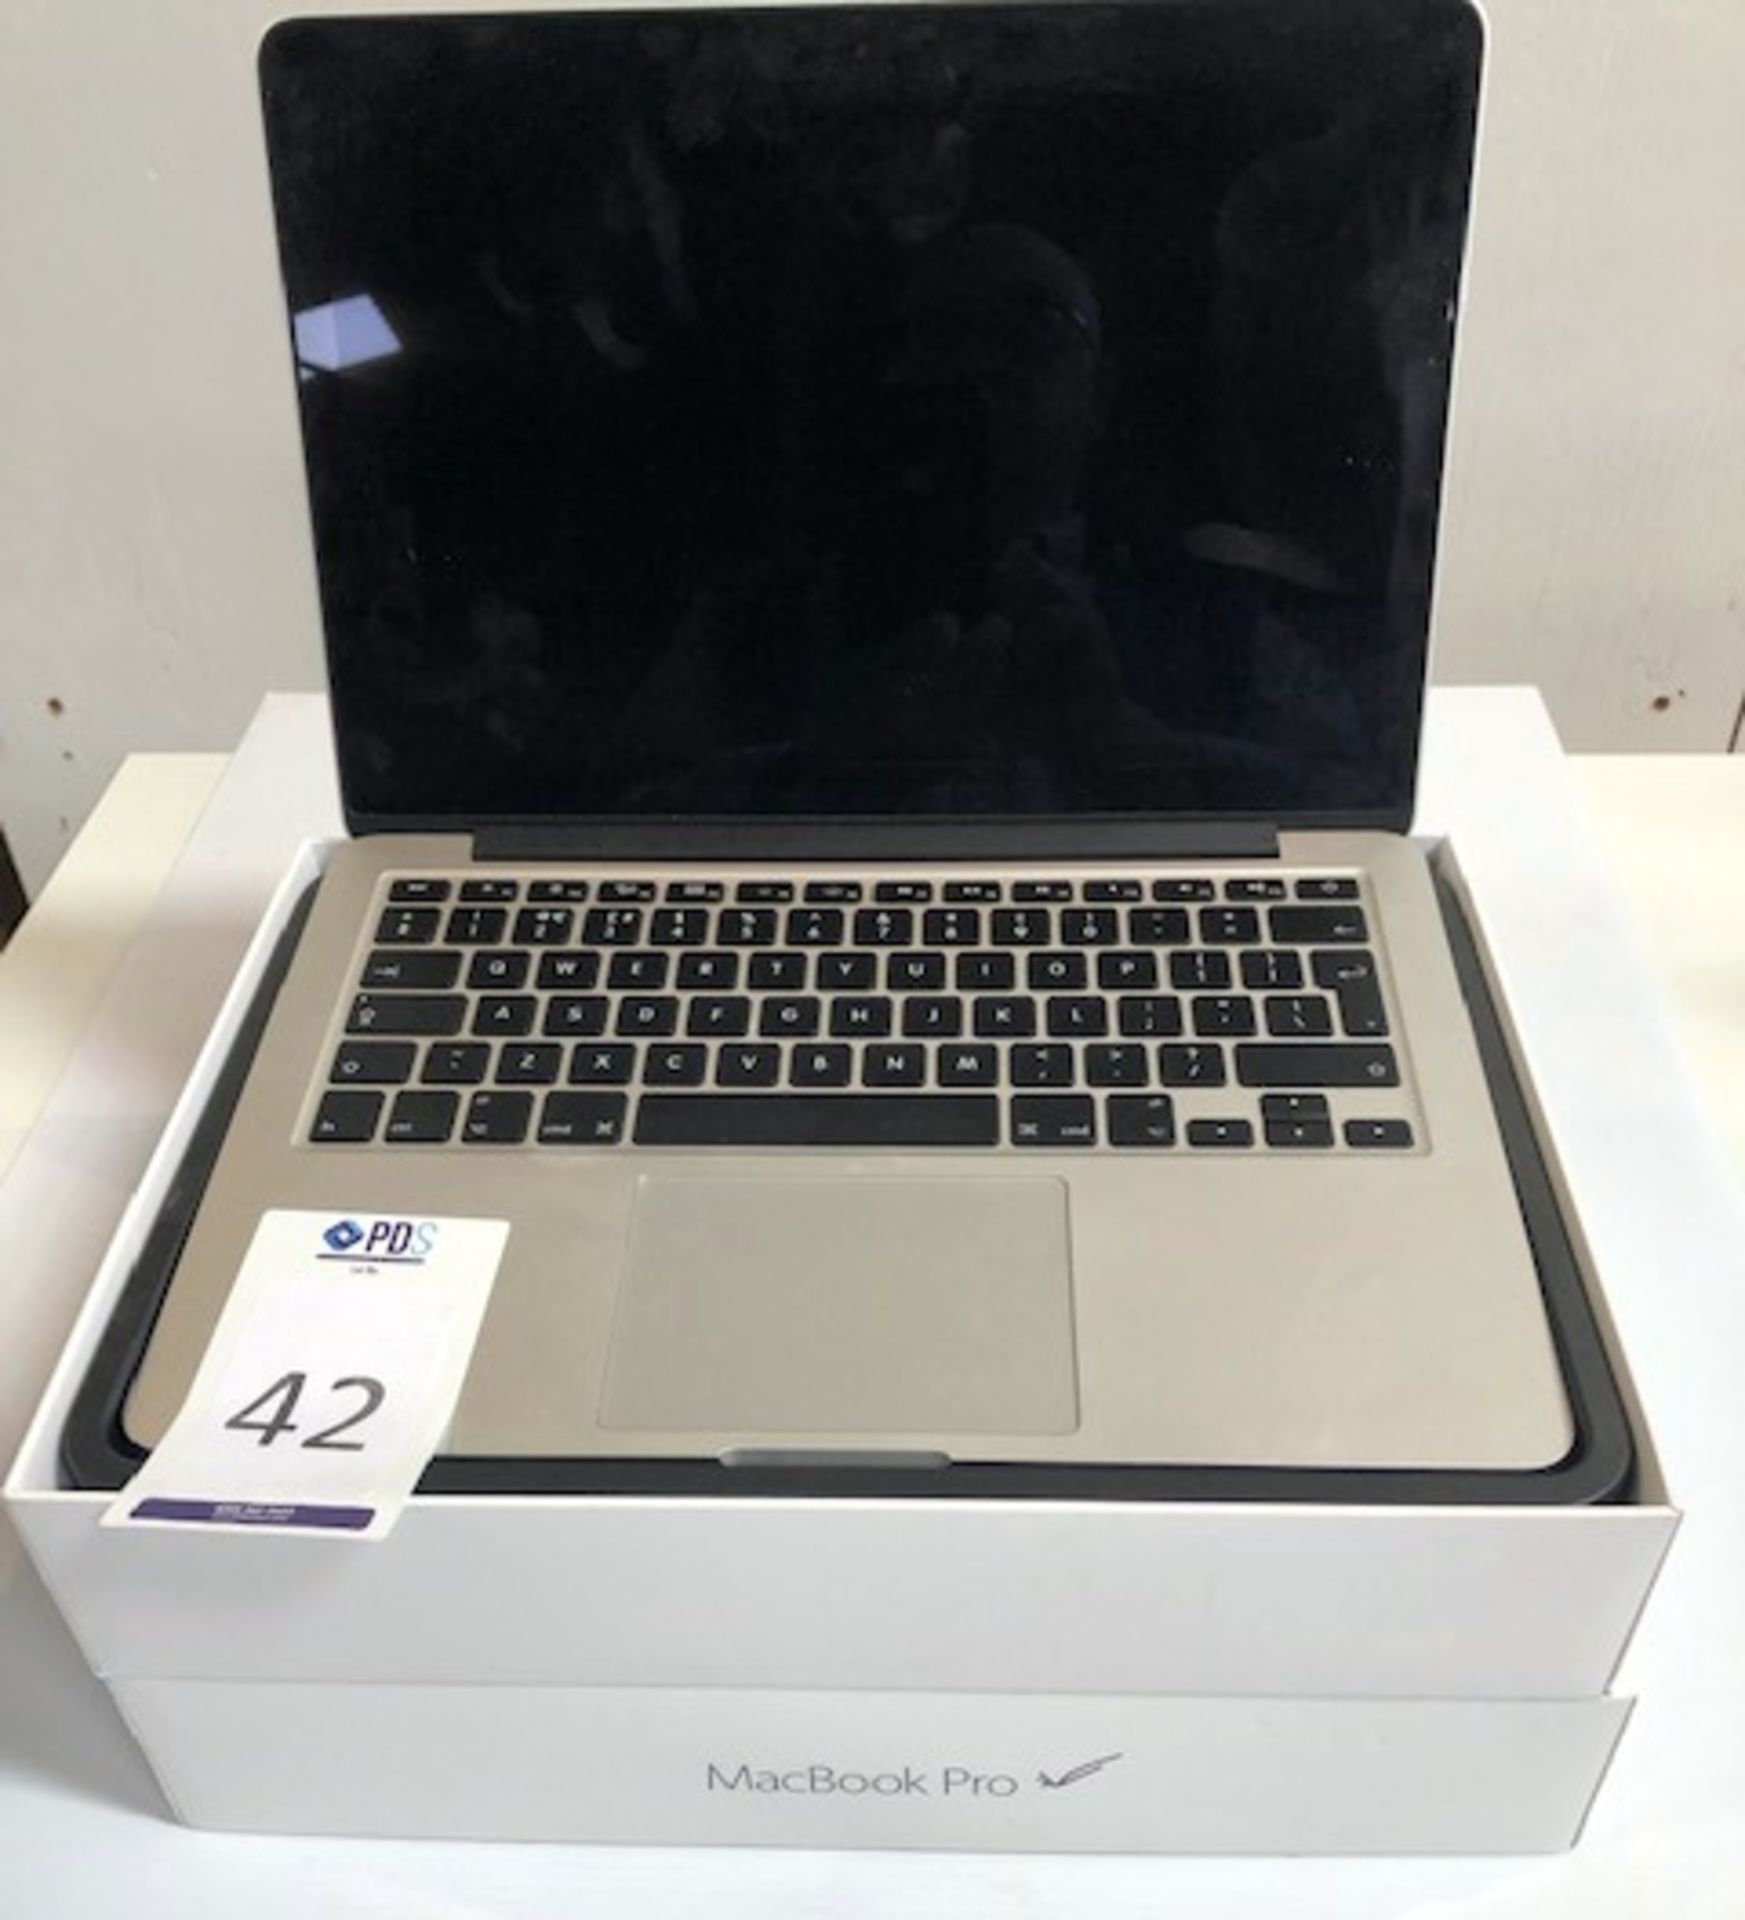 Apple MacBook Pro, 13 Inch Display, 2.7GHz, Core i5, 8GB/128GB (2015), Serial Number: